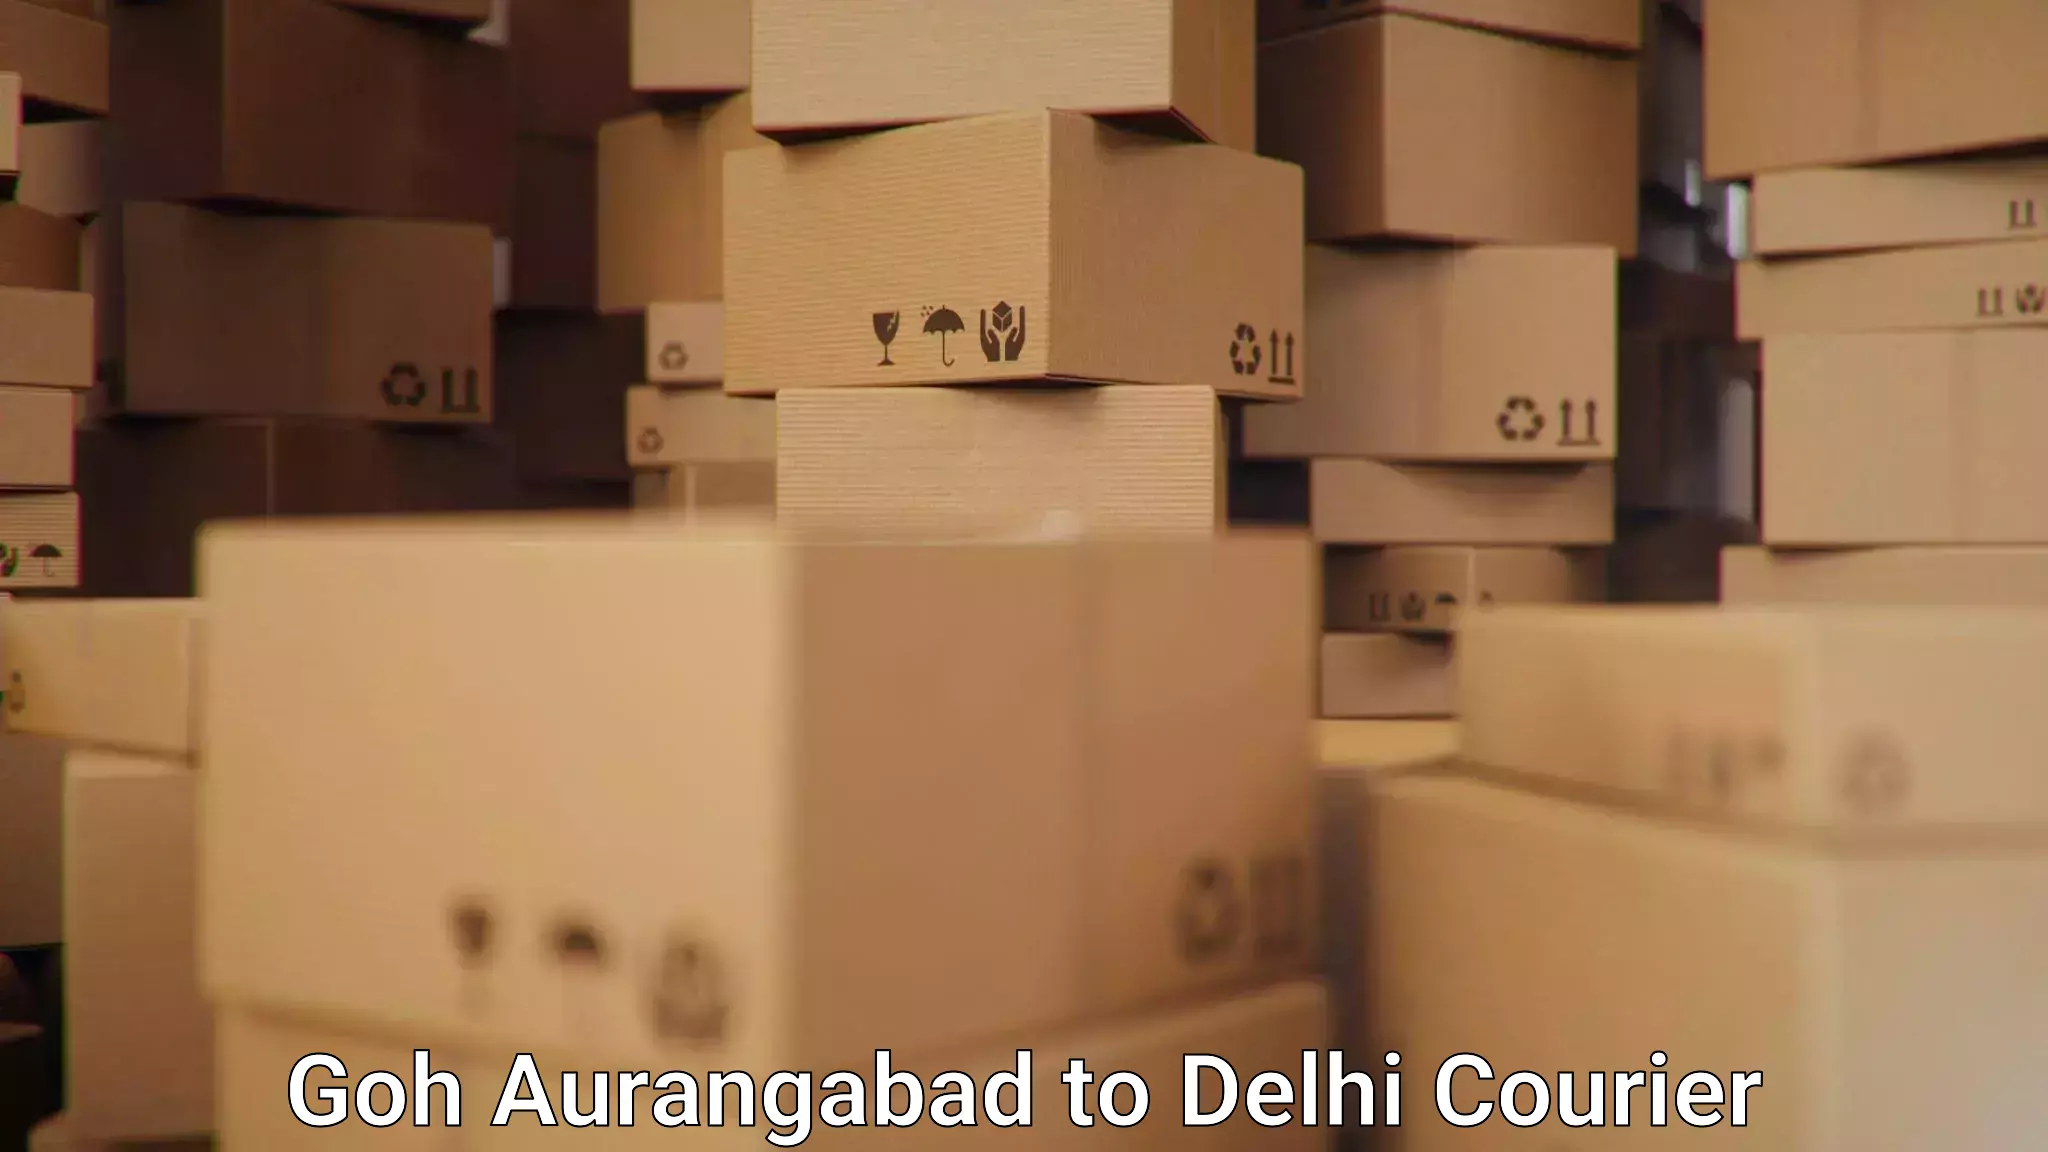 Efficient shipping operations in Goh Aurangabad to NCR